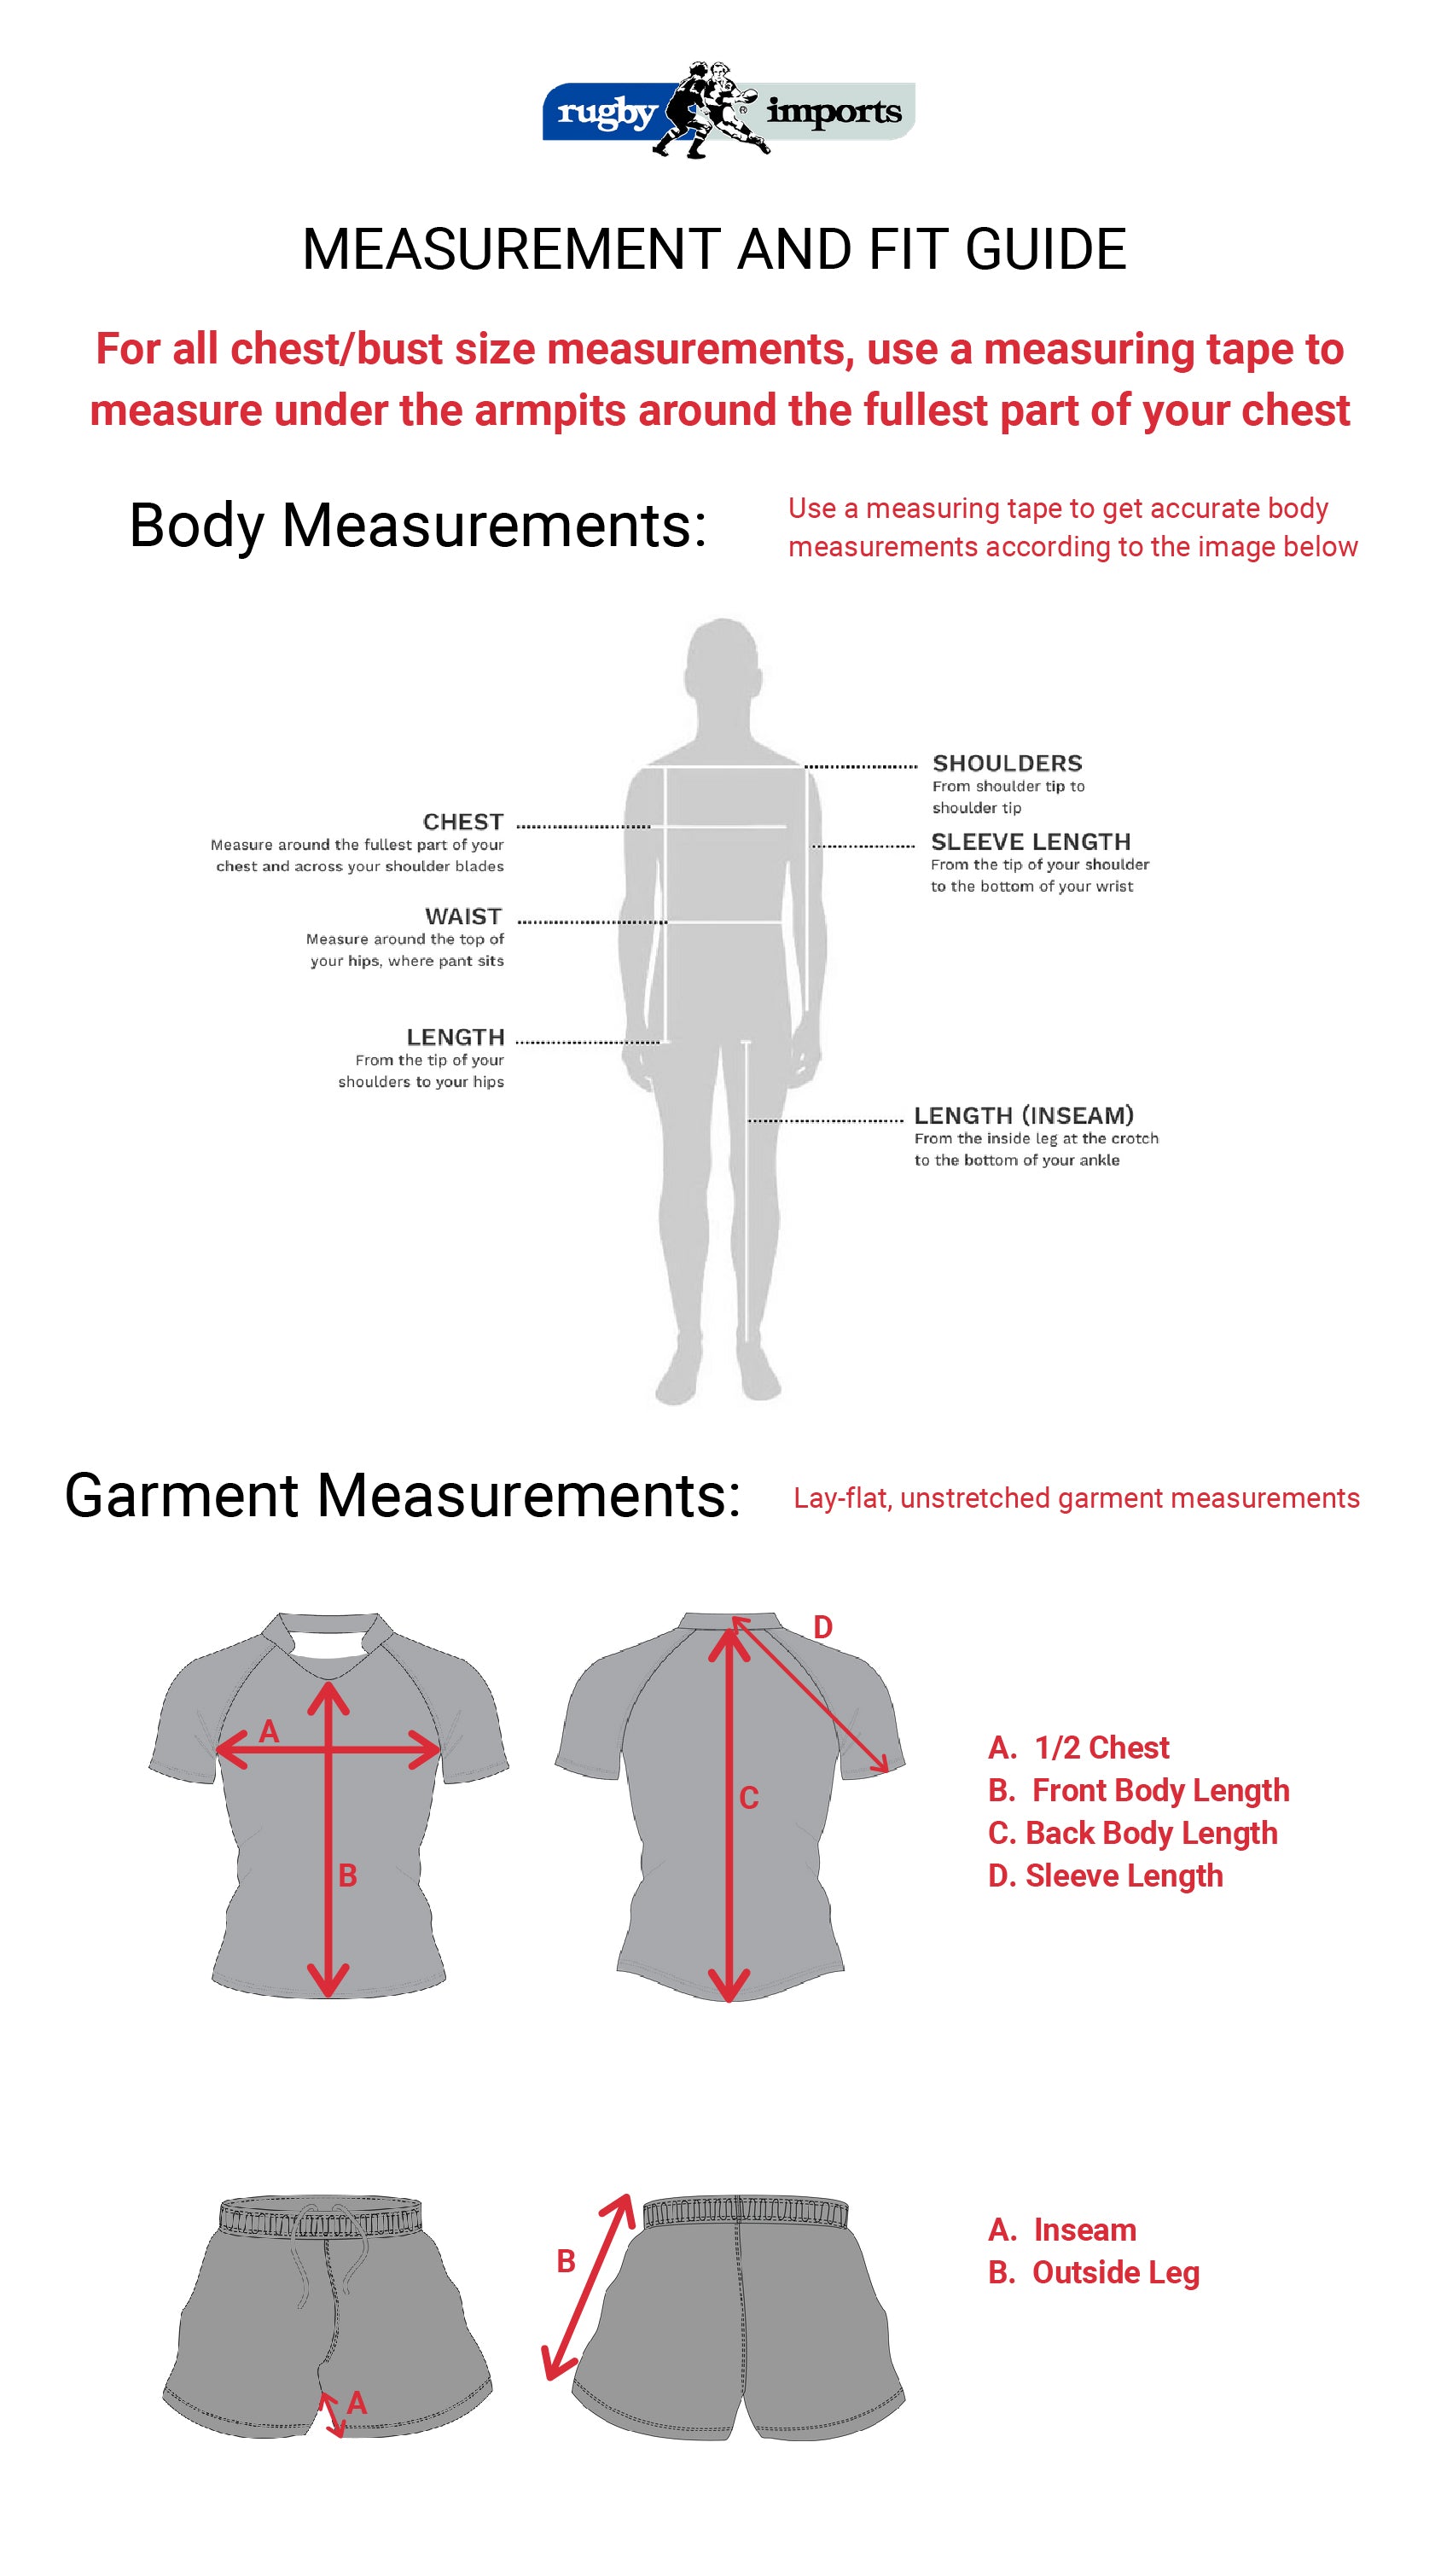 Measurement and fit guide